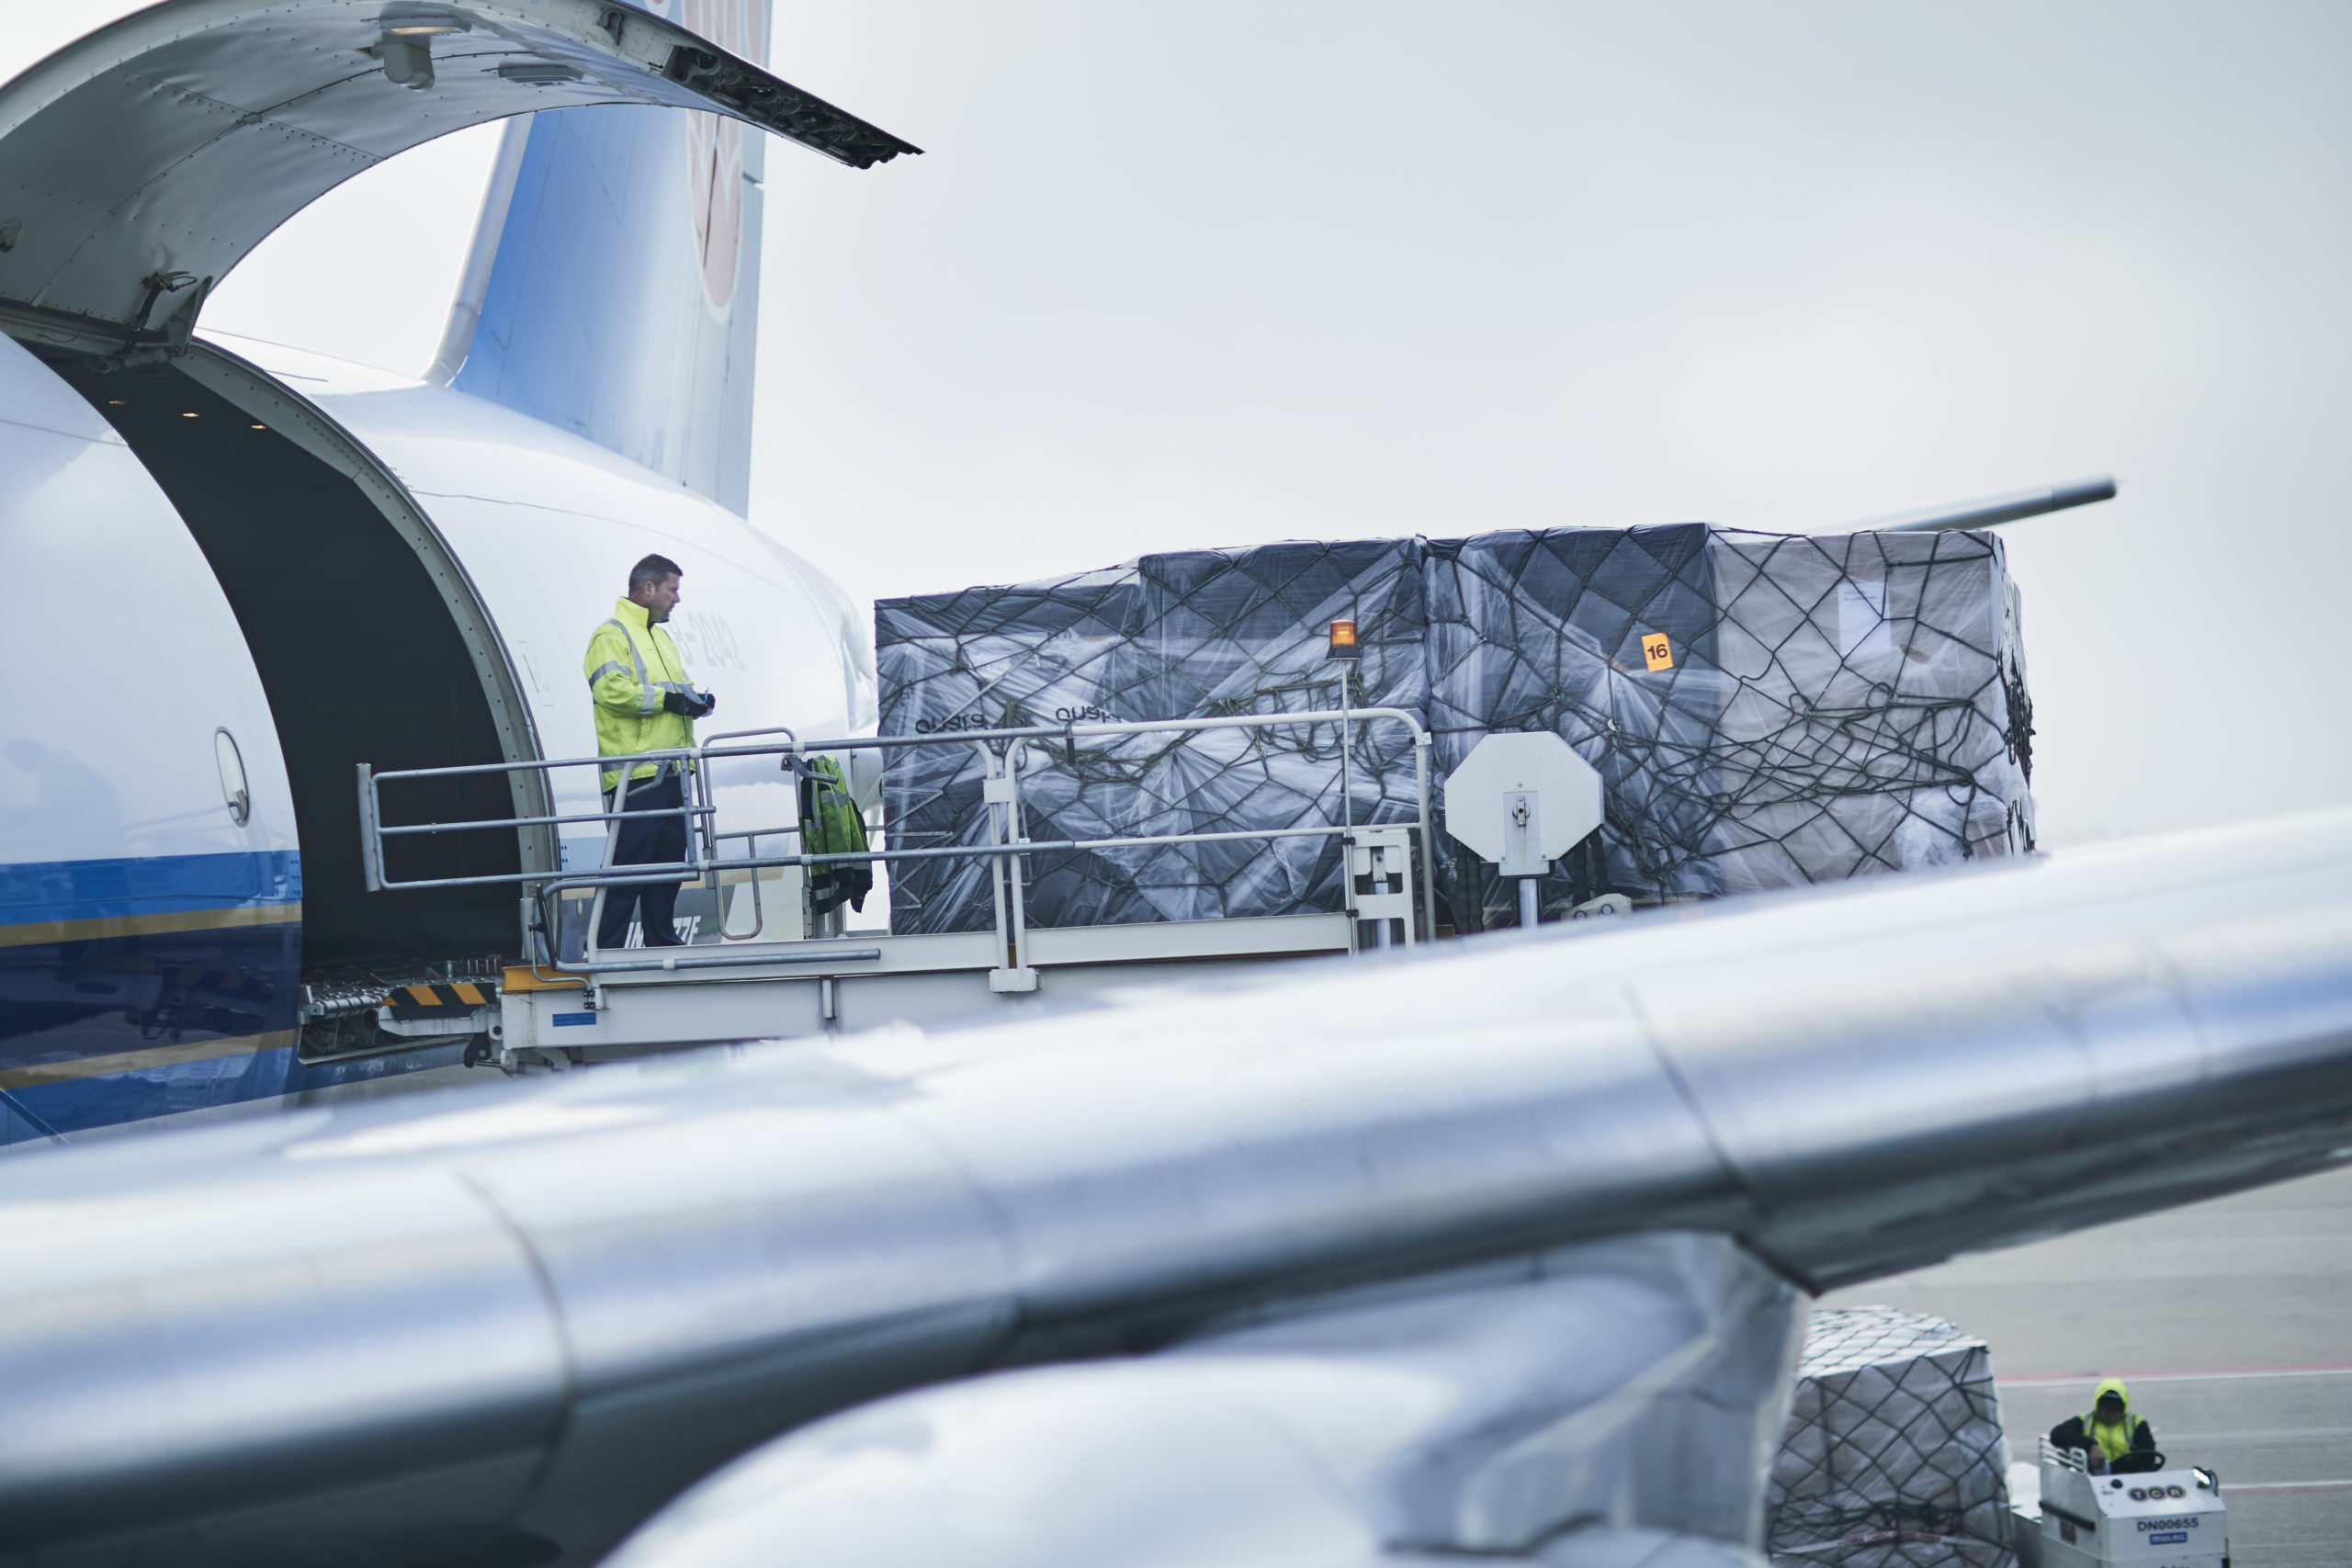 Cargo is loaded onto the main deck of a freighter at Amsterdam Schiphol (AMS). Photo: AMS